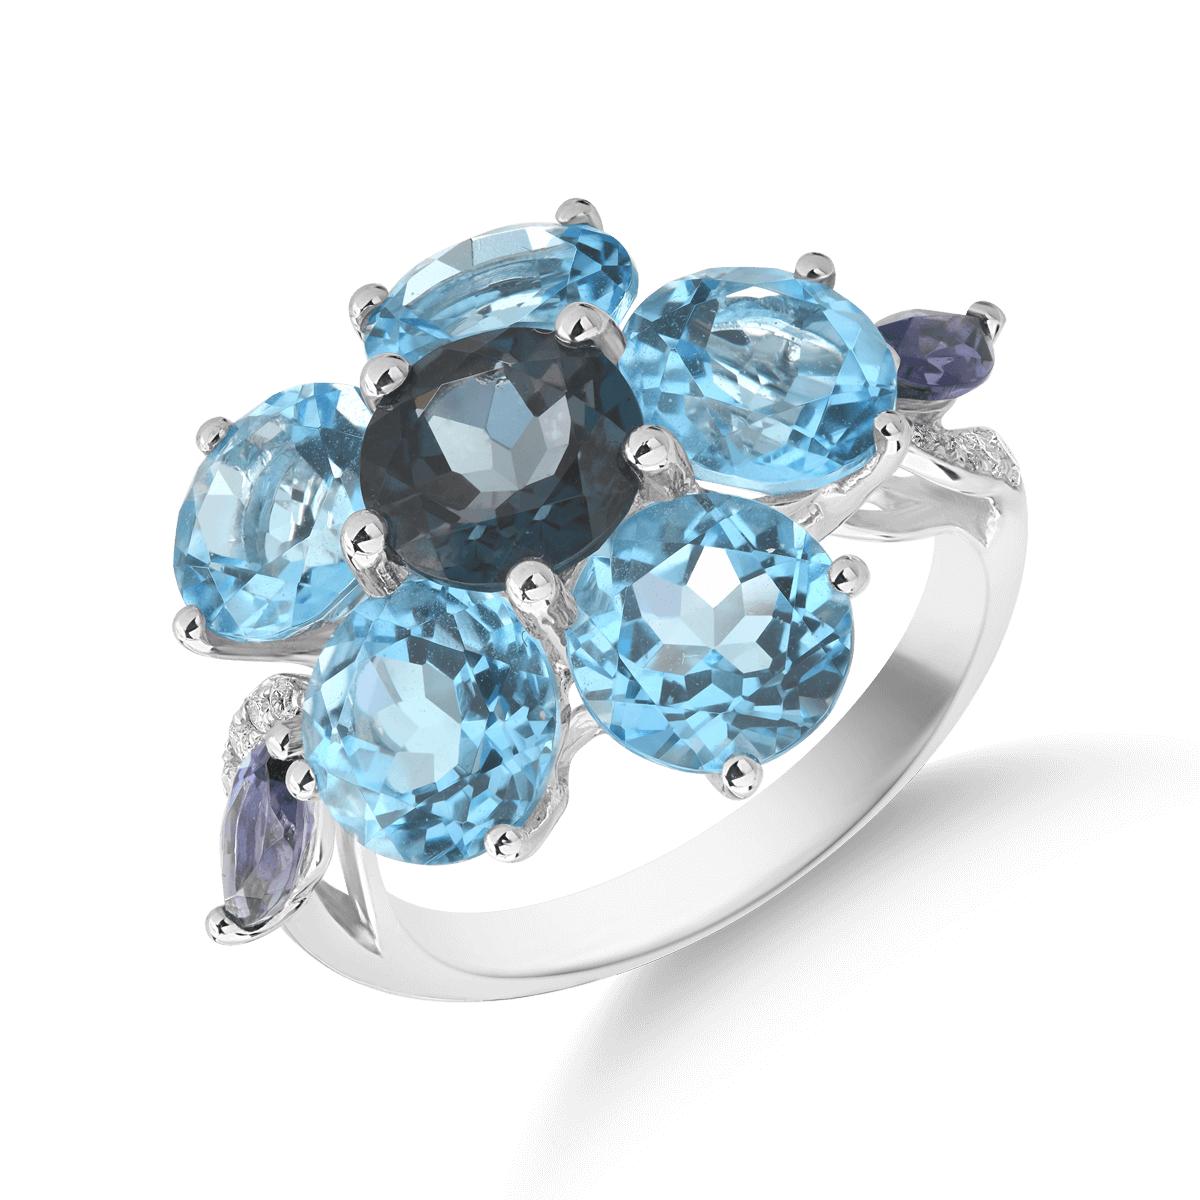 18K white gold flower ring with 9.92ct precious and semiprecious stones